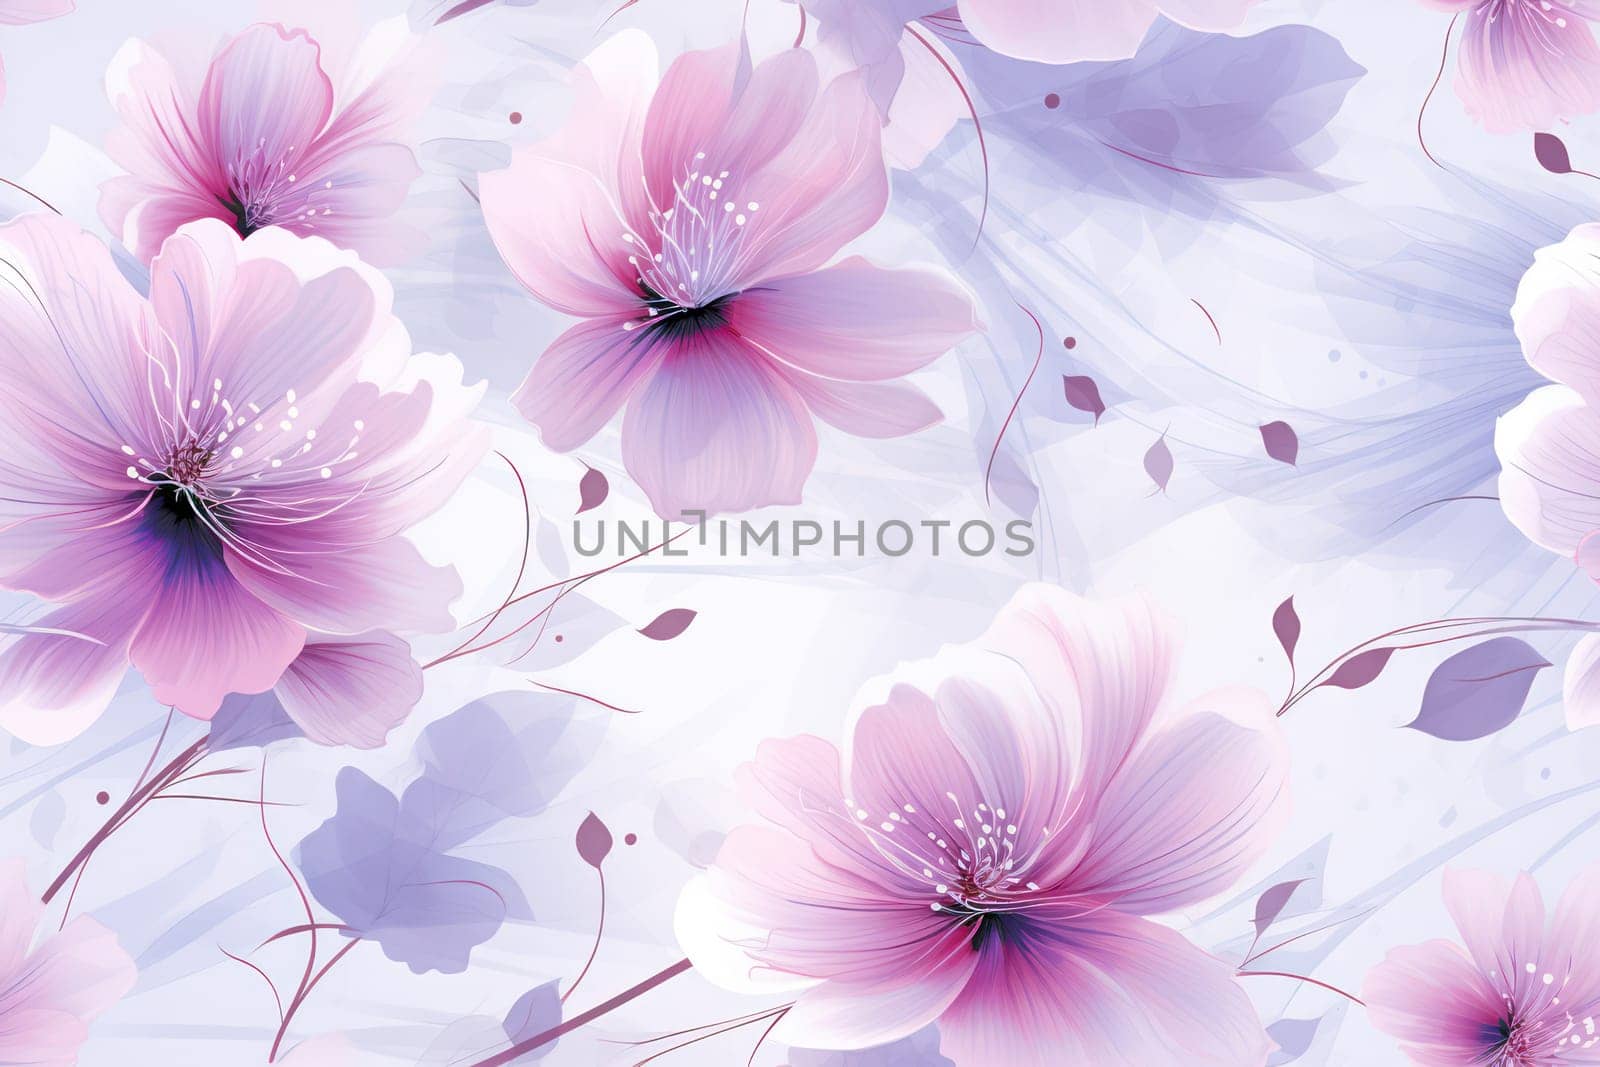 Seamless Floral Wallpaper Pattern: Nature's Beautiful Blossom in Pink and White by Vichizh